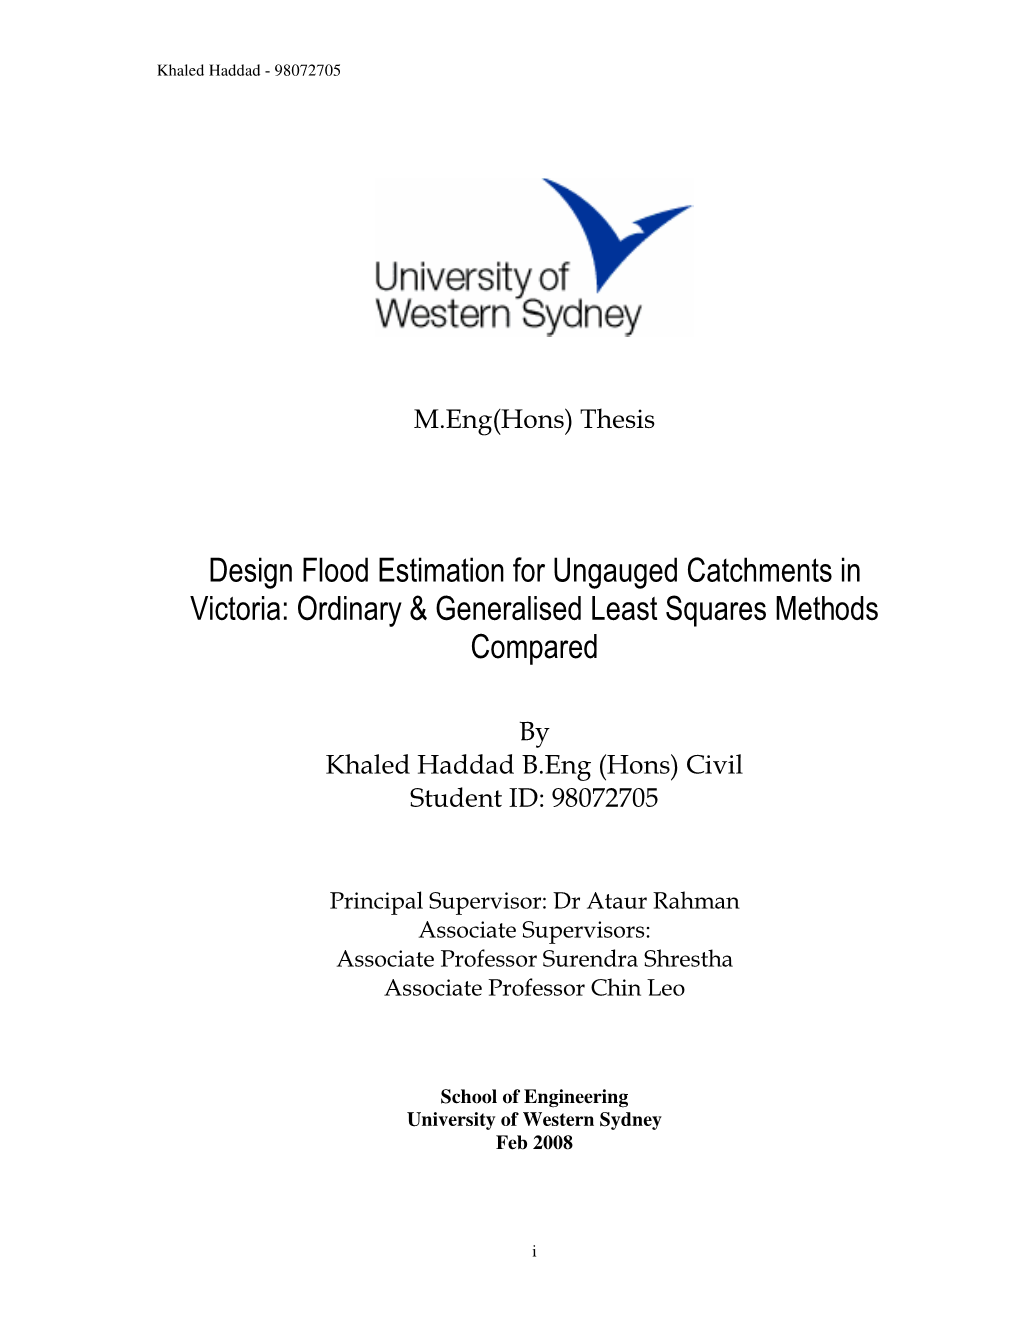 Design Flood Estimation for Ungauged Catchments in Victoria: Ordinary & Generalised Least Squares Methods Compared